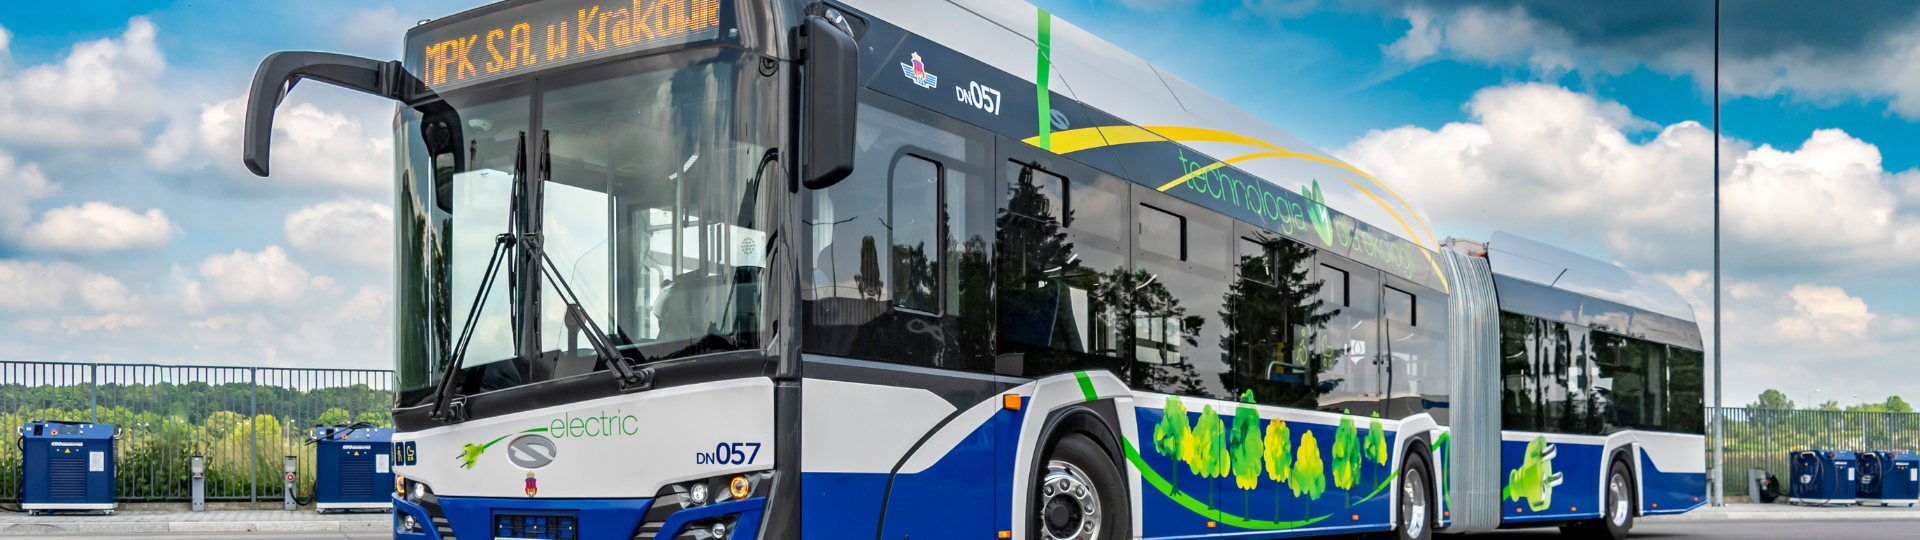 Delivery of 20 new Solaris electric buses for MPK Kraków completed